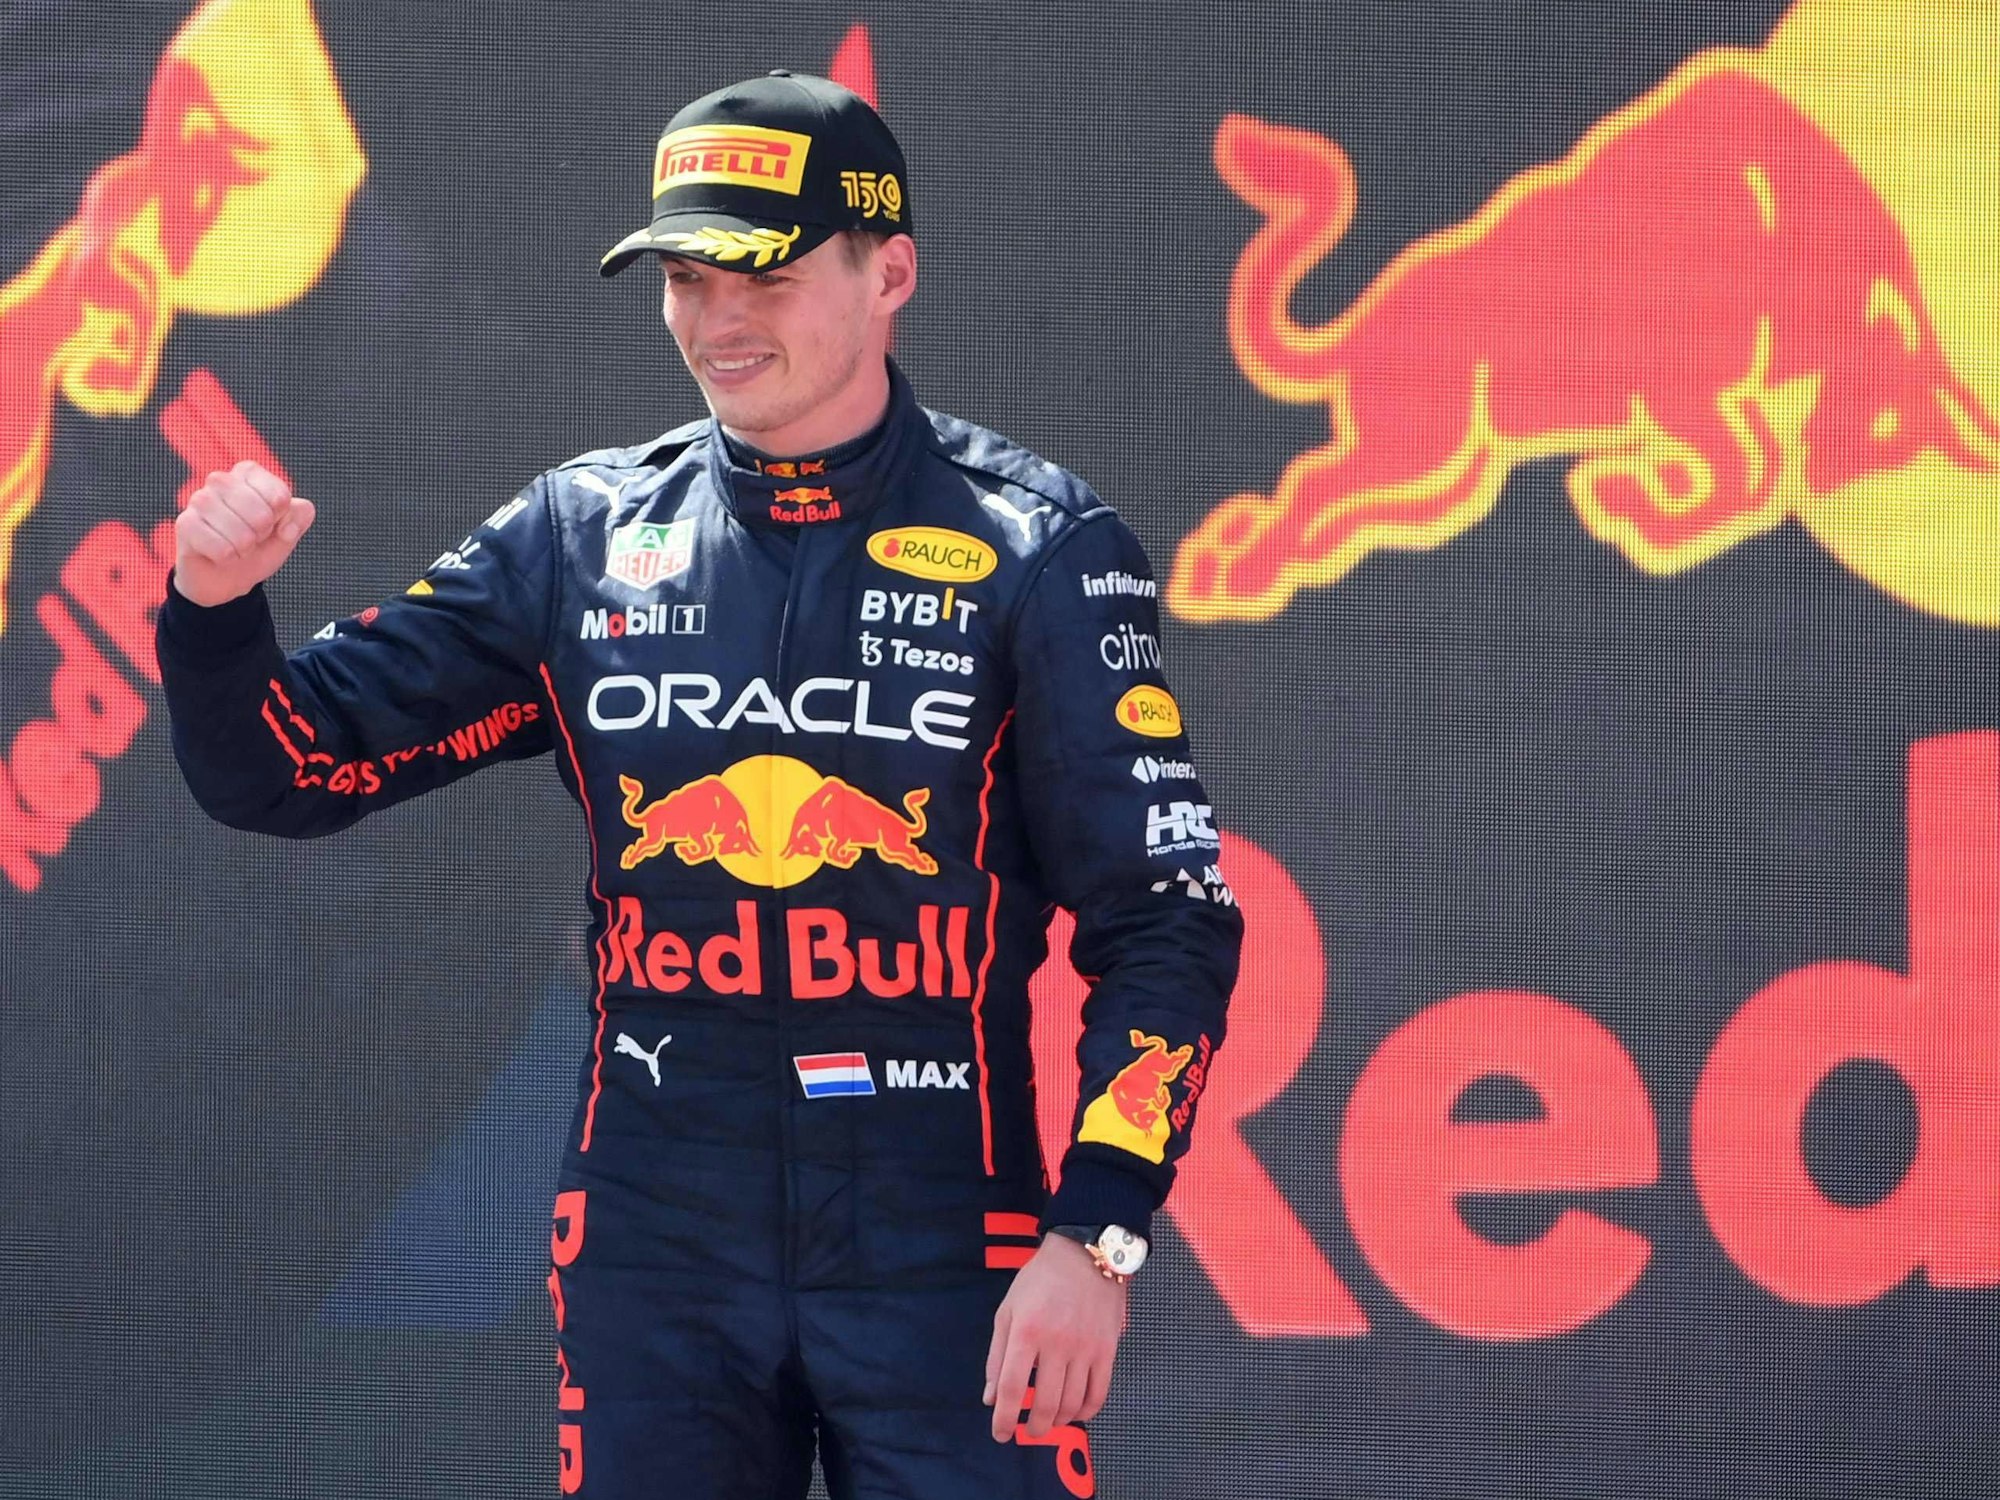 Red Bull's Dutch driver Max Verstappen celebrates on the podium after winning the Spanish Formula One Grand Prix at the Circuit de Catalunya on May 21, 2022 in Montmelo, on the outskirts of Barcelona. (Photo by LLUIS GENE / AFP)